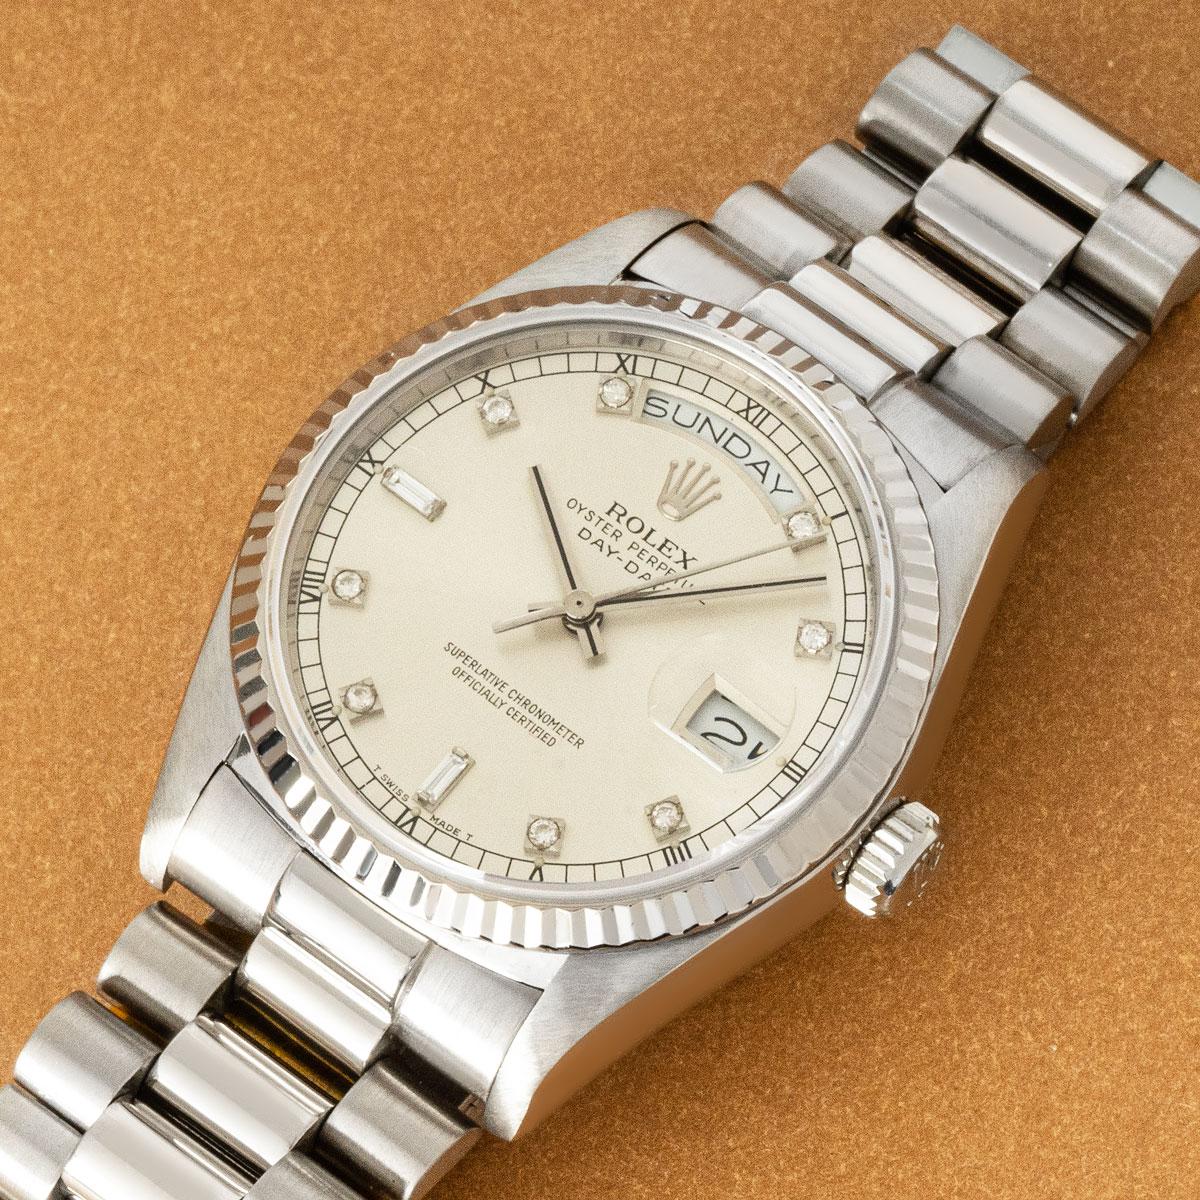 A 36mm Day-Date in white gold by Rolex. Features a silver dial set with 8 single cut diamonds, 2 baguette cut diamonds and a fixed white gold fluted bezel.

Fitted with sapphire crystal, a self-winding automatic movement and a president bracelet